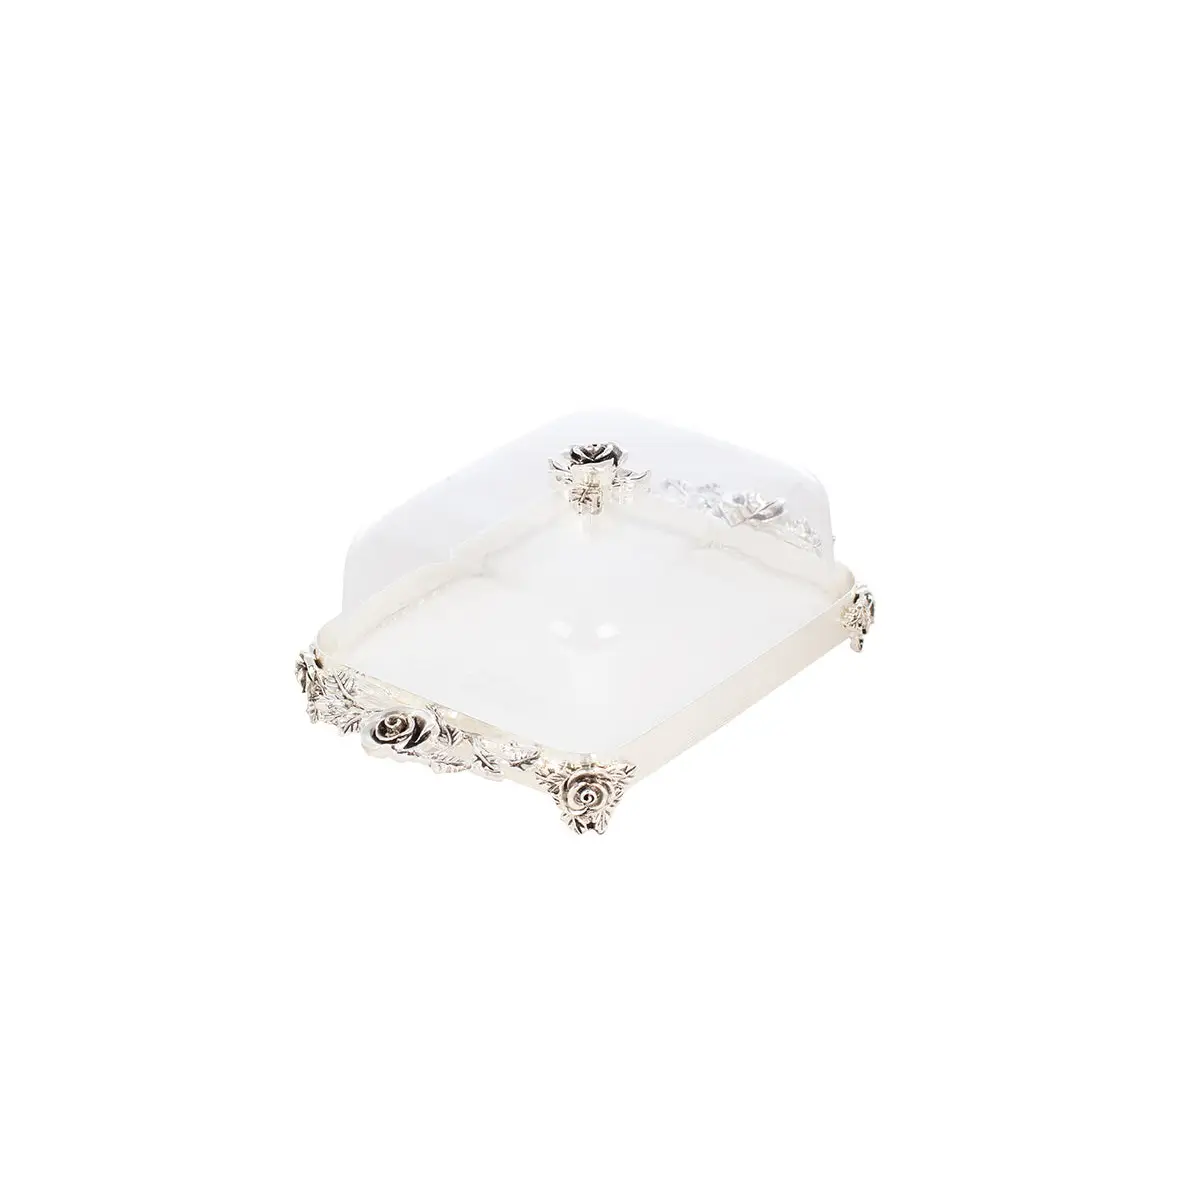 SILVER PLATED BUTTETR DISH - ROSE COLLECTION